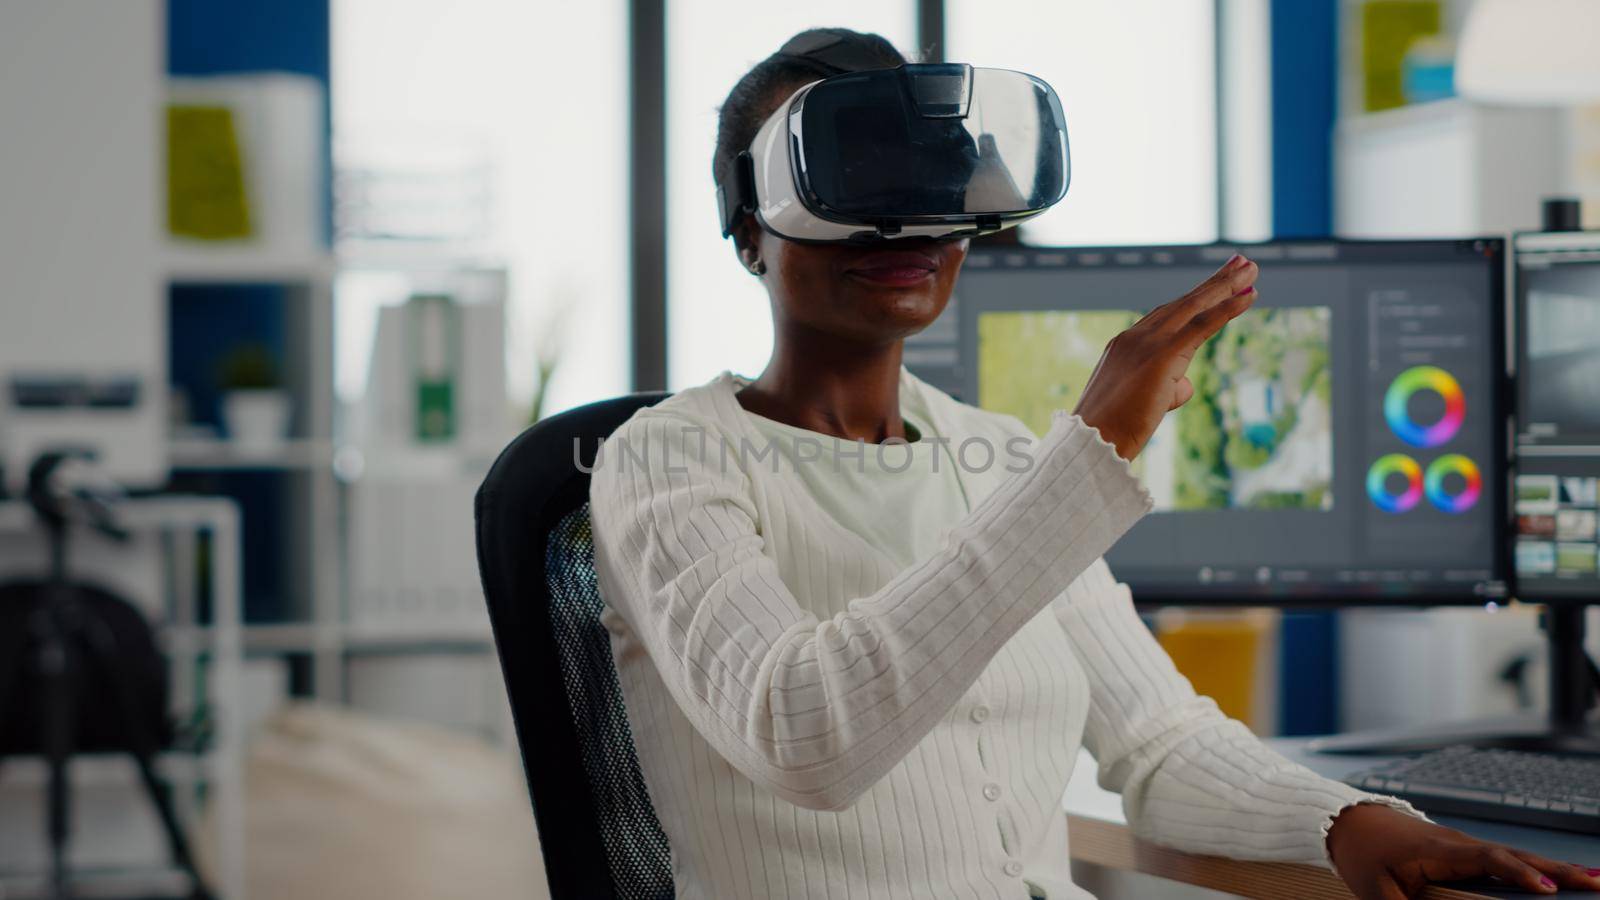 Black videographer wearing VR headset editing project in production studio office. Video maker employee processing film montage in digital multimedia company while, colleagues working in background